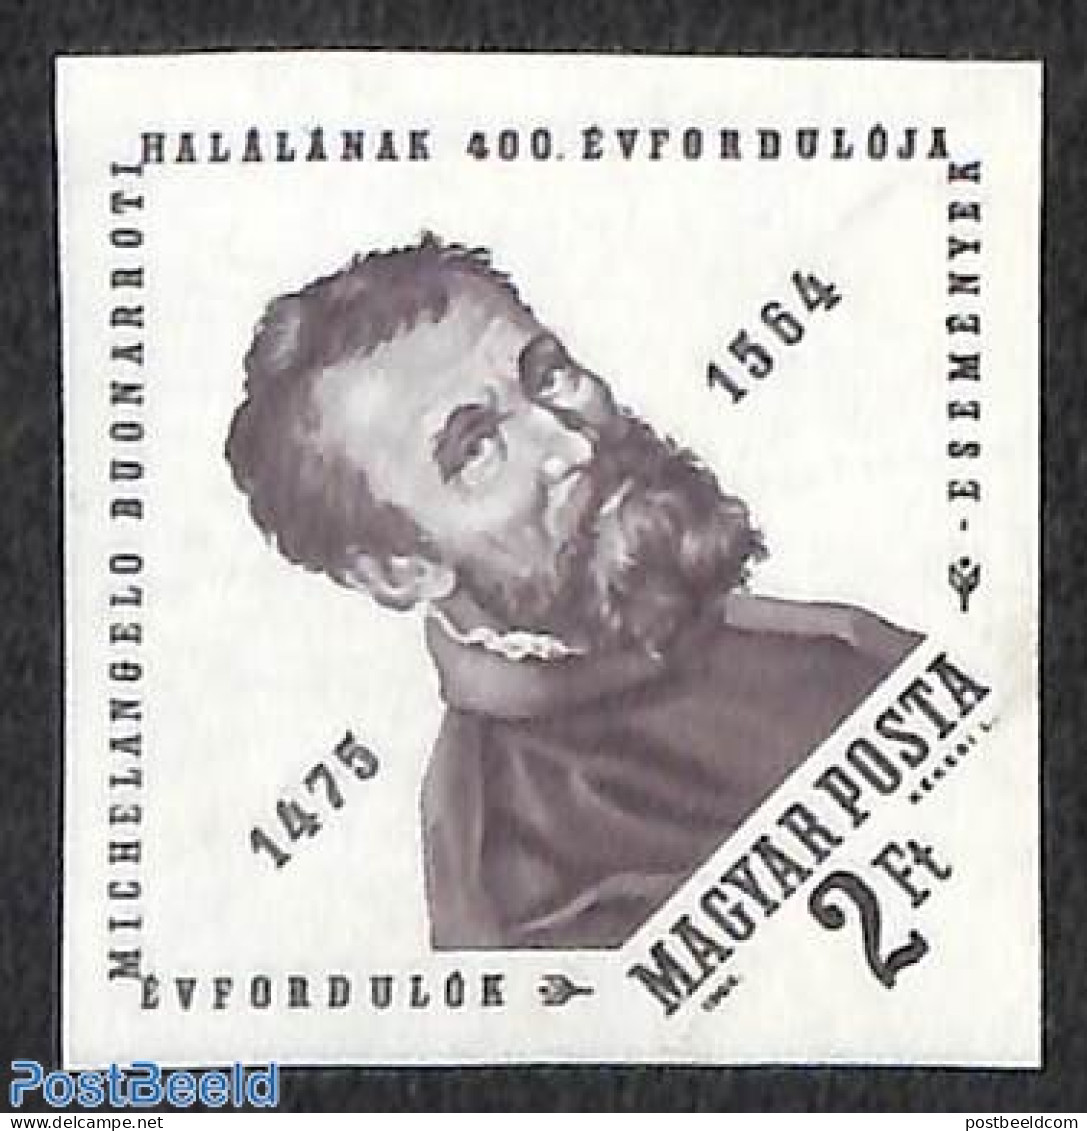 Hungary 1964 Michelangelo 1v Imperforated, Mint NH, Art - Michelangelo - Sculpture - Self Portraits - Unused Stamps